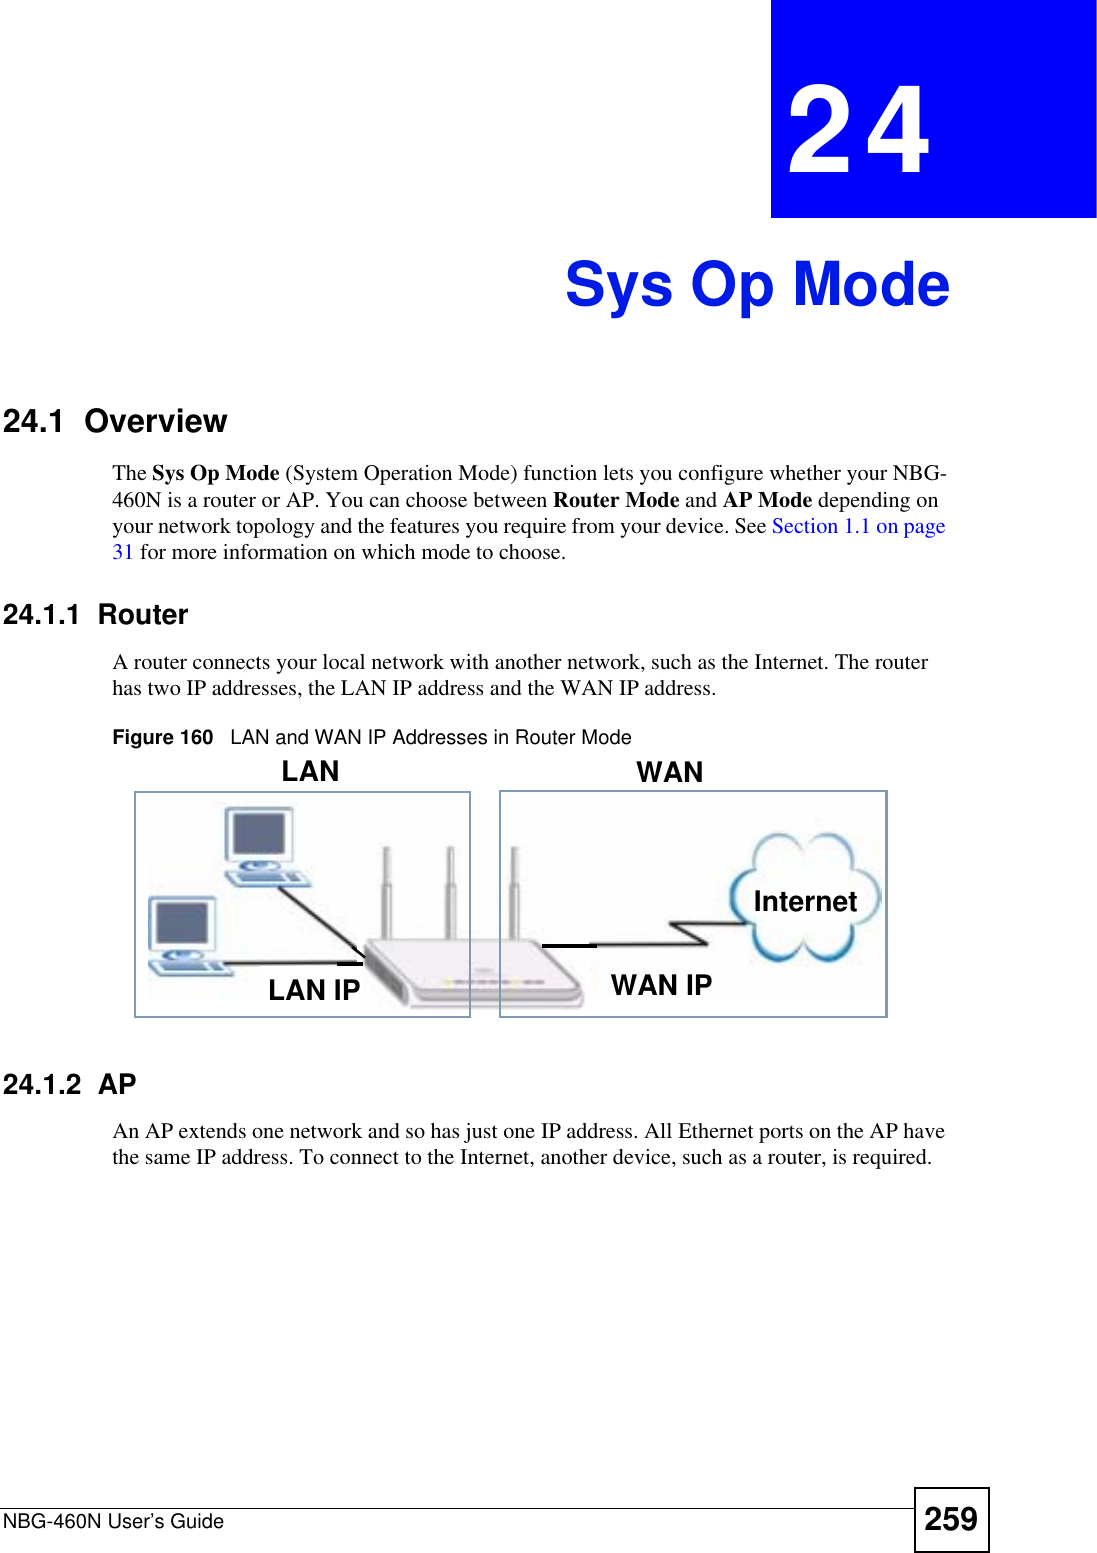 NBG-460N User’s Guide 259CHAPTER 24Sys Op Mode24.1  OverviewThe Sys Op Mode (System Operation Mode) function lets you configure whether your NBG-460N is a router or AP. You can choose between Router Mode and AP Mode depending on your network topology and the features you require from your device. See Section 1.1 on page 31 for more information on which mode to choose.24.1.1  Router A router connects your local network with another network, such as the Internet. The router has two IP addresses, the LAN IP address and the WAN IP address.Figure 160   LAN and WAN IP Addresses in Router Mode24.1.2  AP An AP extends one network and so has just one IP address. All Ethernet ports on the AP have the same IP address. To connect to the Internet, another device, such as a router, is required.WAN IPInternetLAN WANLAN IP